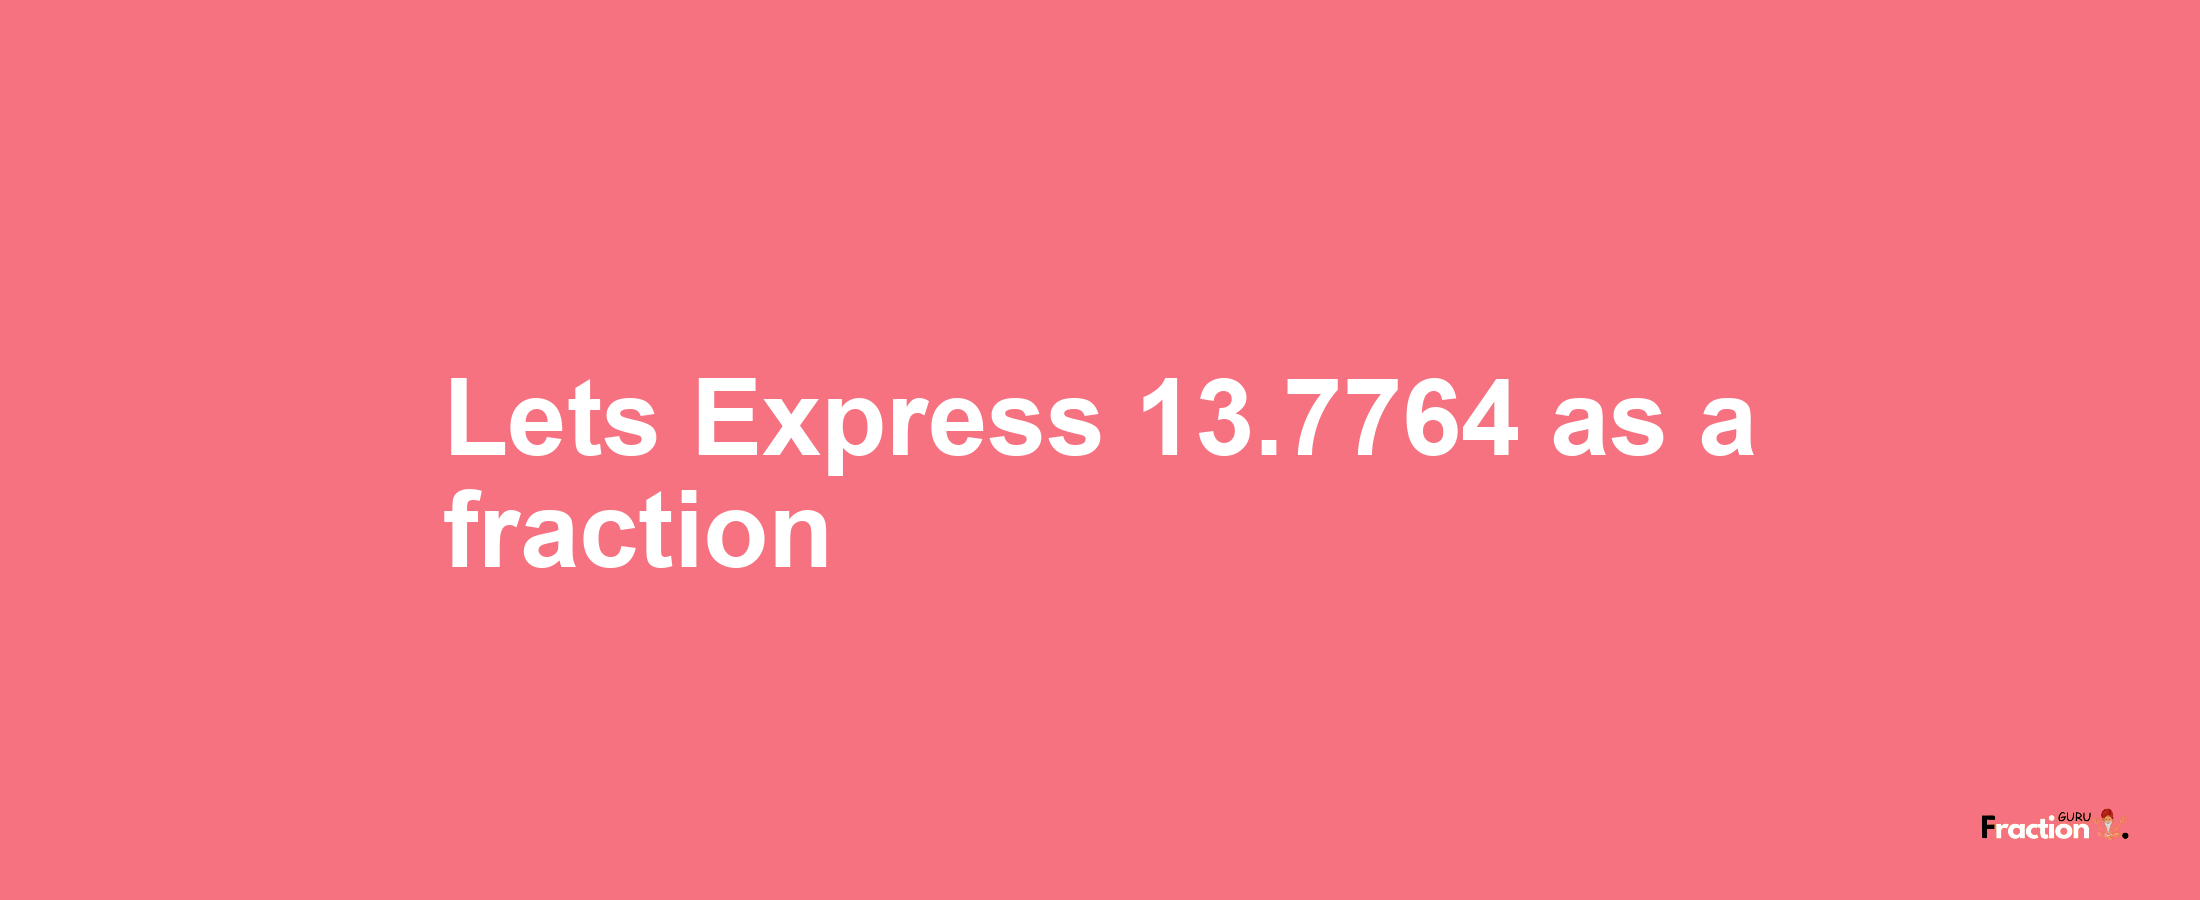 Lets Express 13.7764 as afraction